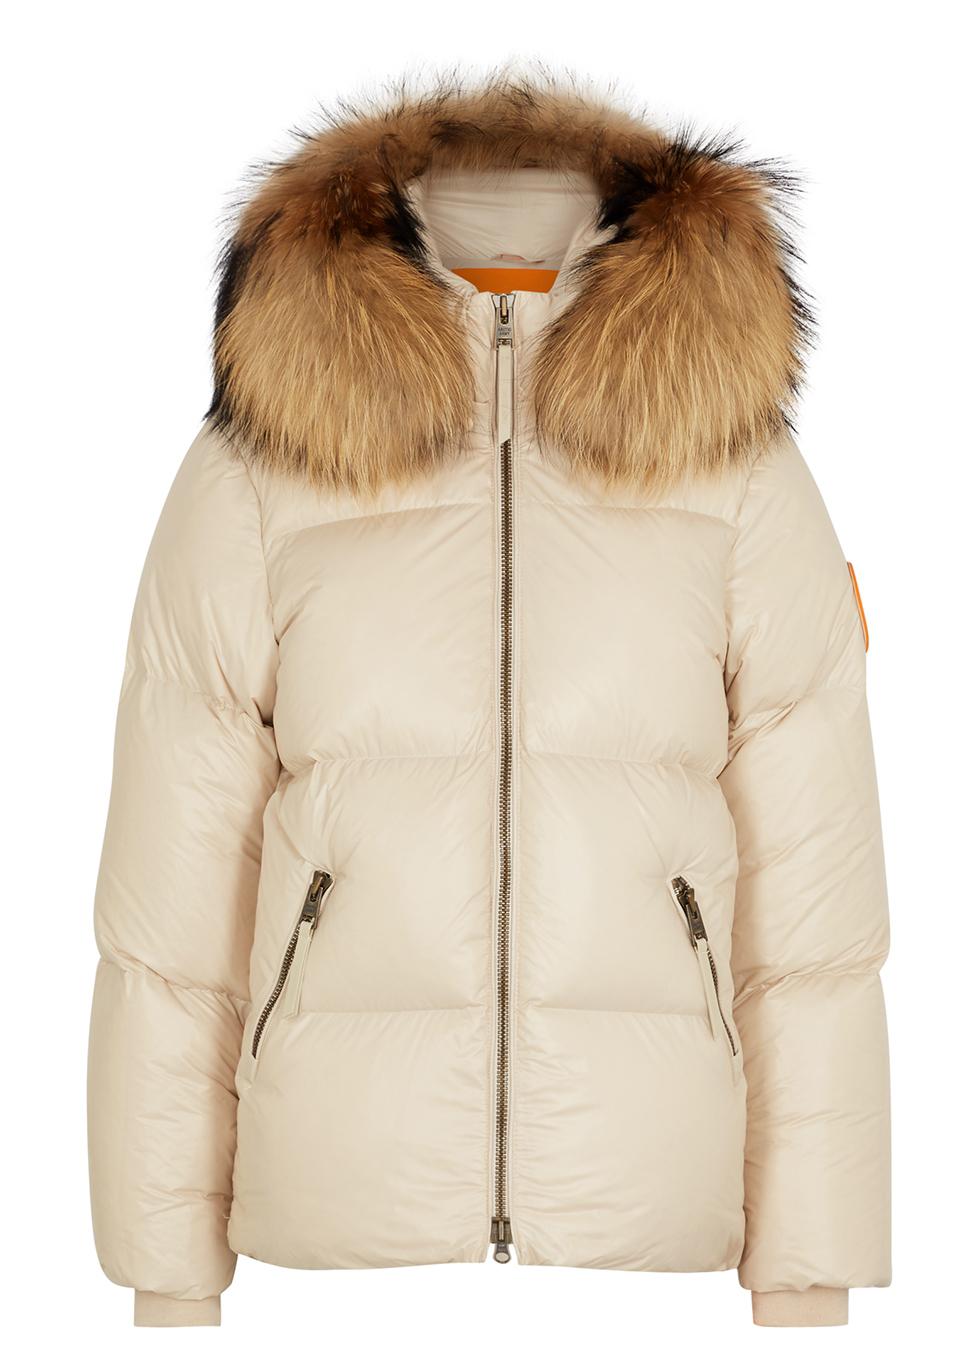 Almond fur-trimmed quilted shell jacket by ARCTIC ARMY